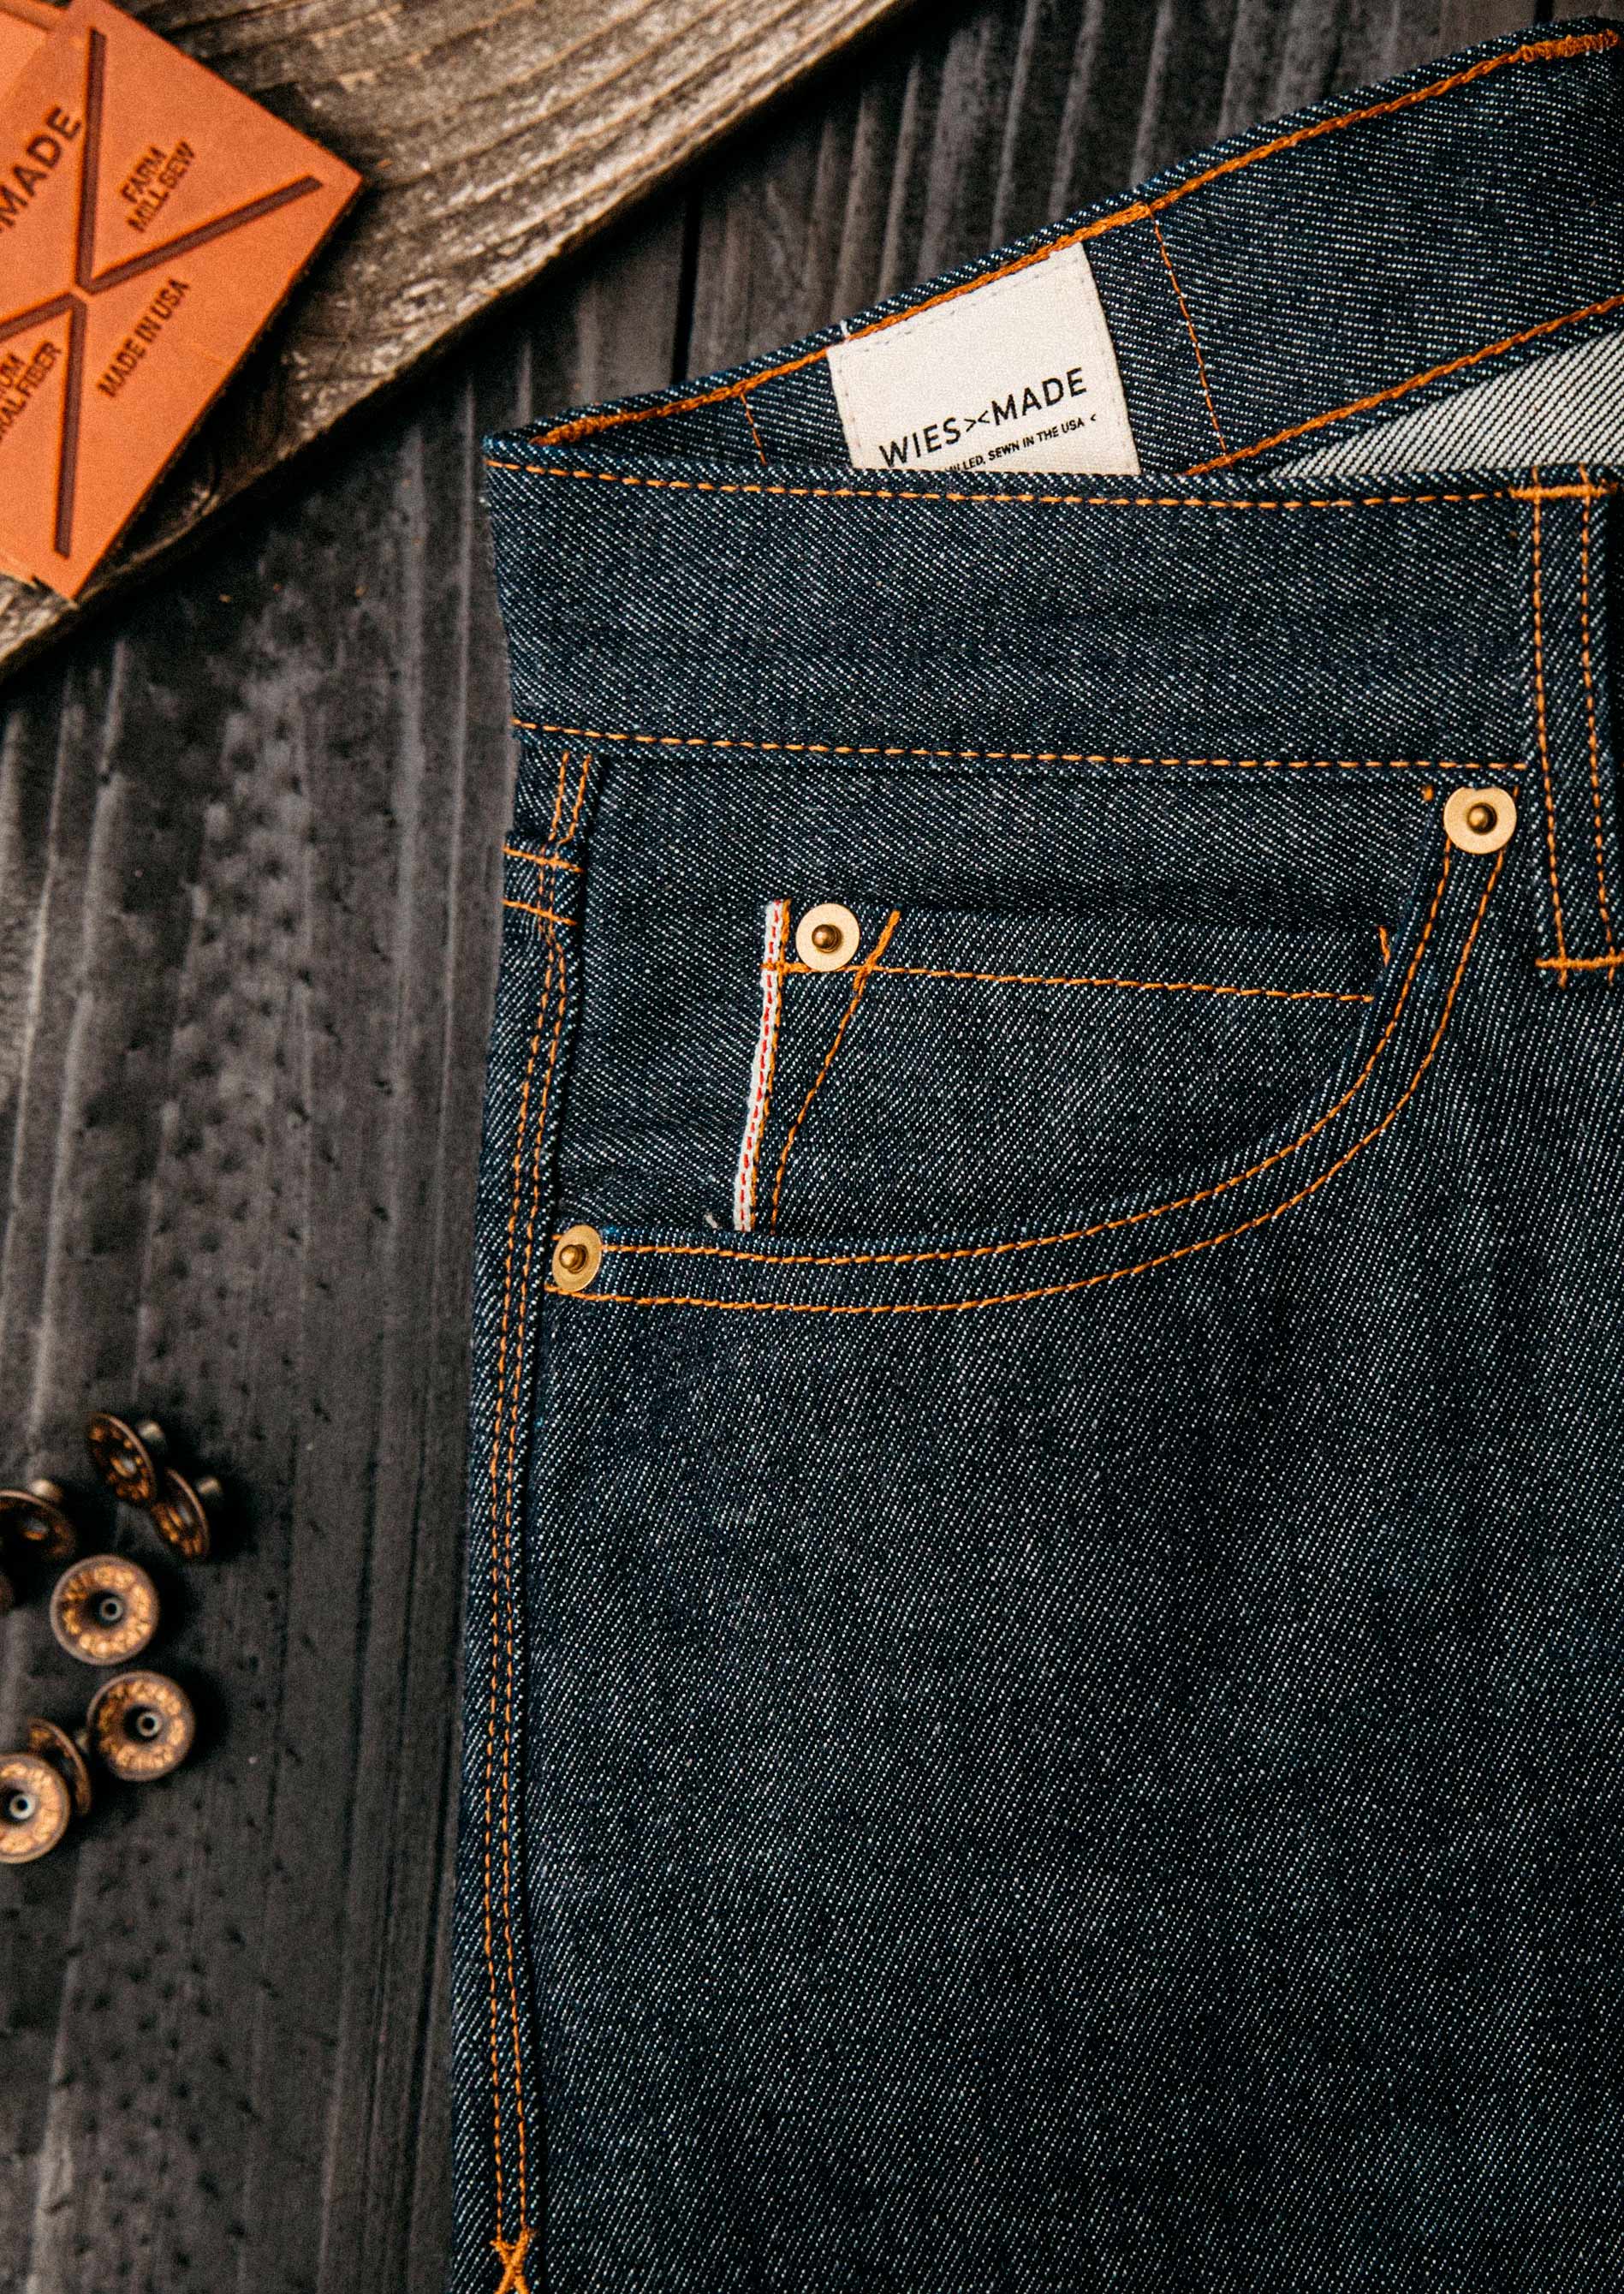 Buy Exclusive Japanese Selvedge Denim Jeans from RMC